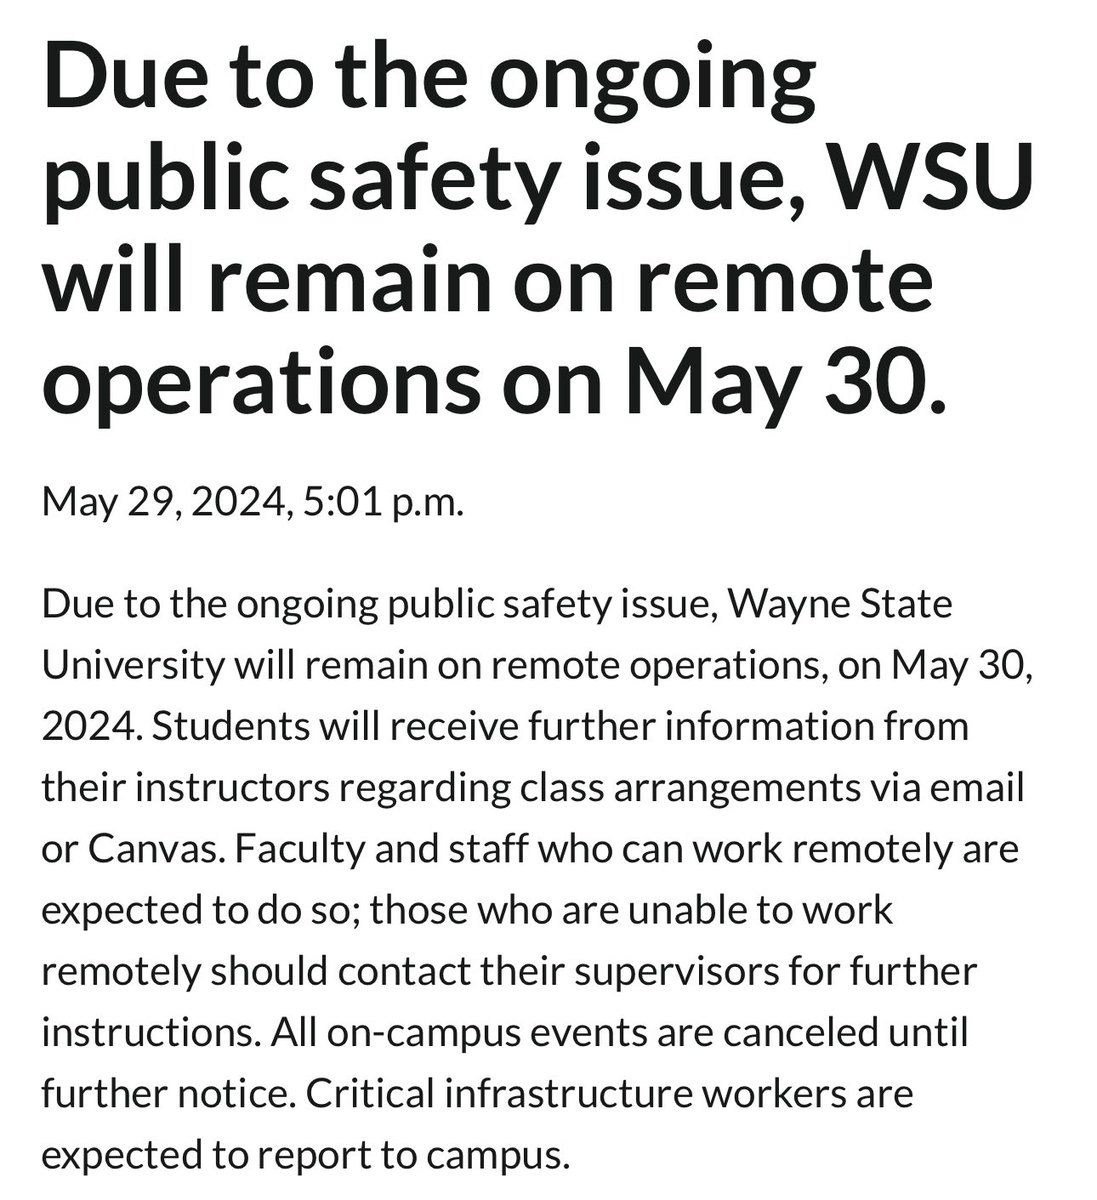 Wayne State University announces they will remain on remote operations “Due to the ongoing public safety issue”, with all on-campus events canceled until further notice The university announced a transition to remote operations early Tuesday morning, and all on-campus events